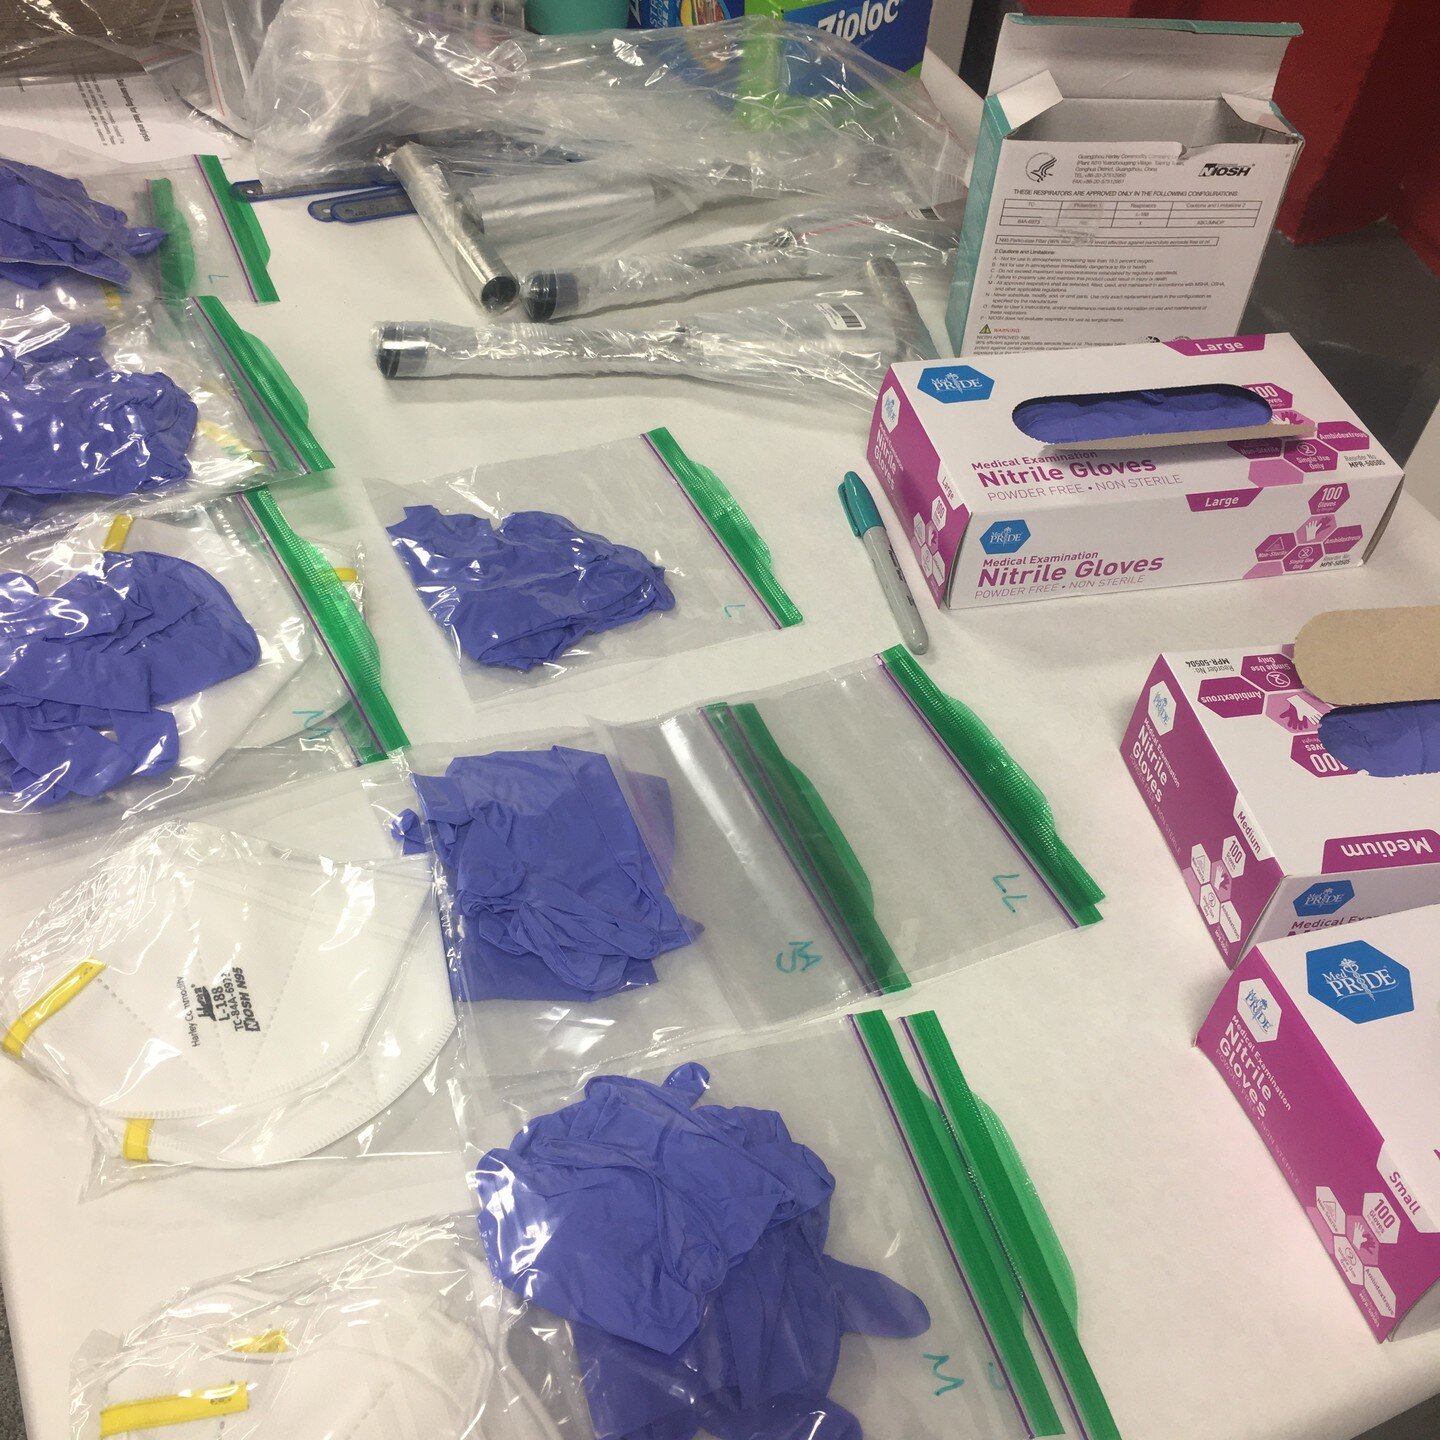 Volunteers are trained, sample kits are prepared and we are ready to get your soil in the lab!

Here&rsquo;s a peek at some of the materials in our soil sampling kit! 

Volunteers have been trained on all necessary safety precautions and will ensure 